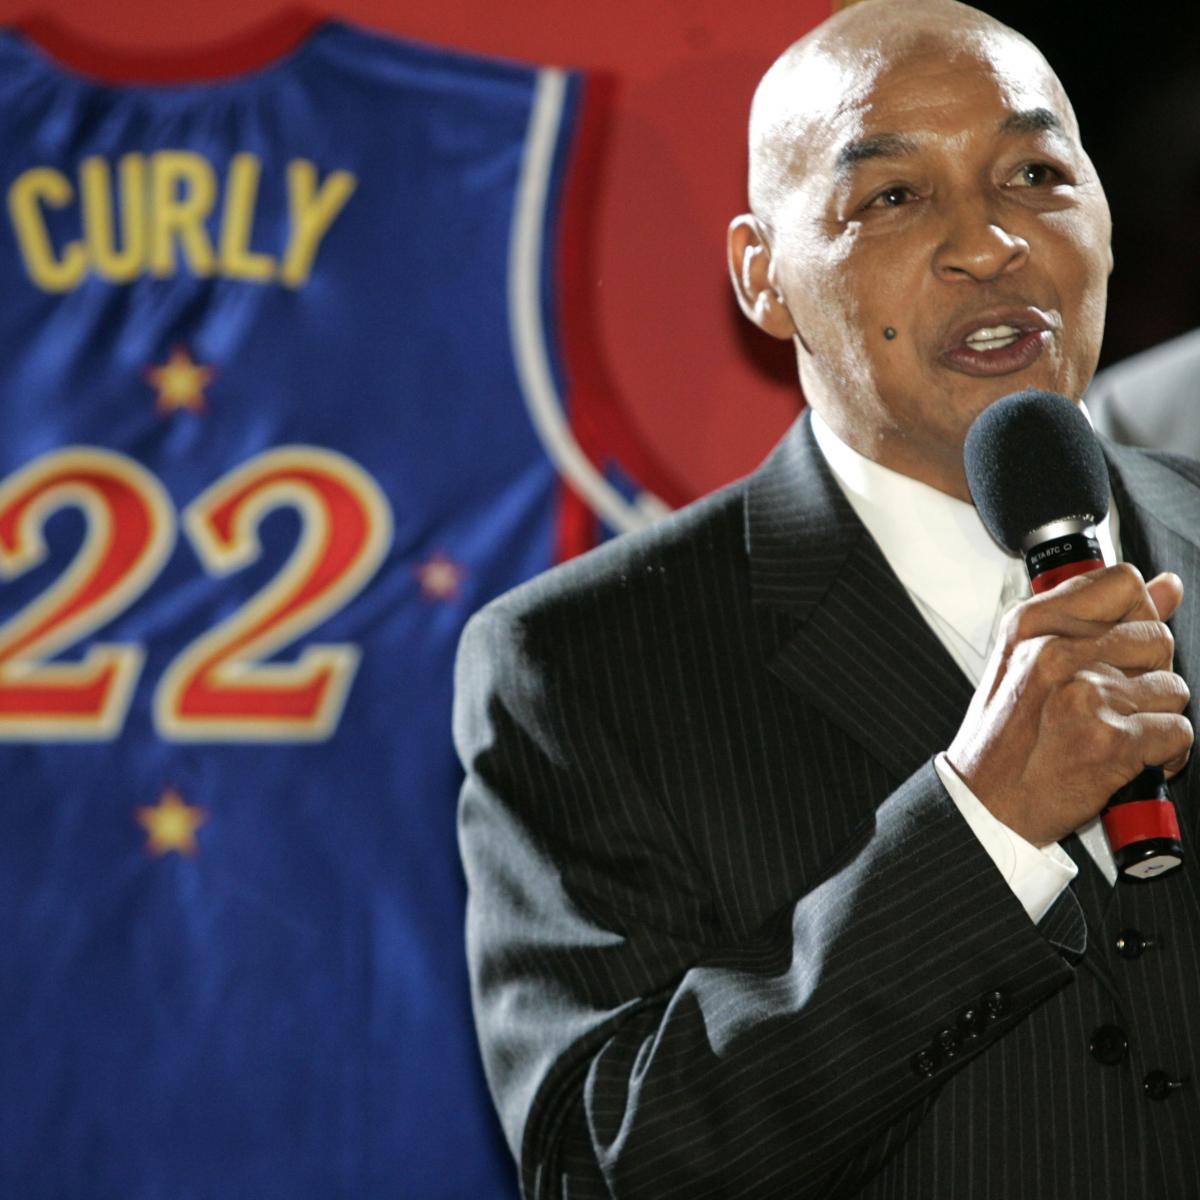 Harlem Globetrotters Legend Fred 'Curly' Neal Dies at Age 77 - Bleacher Report